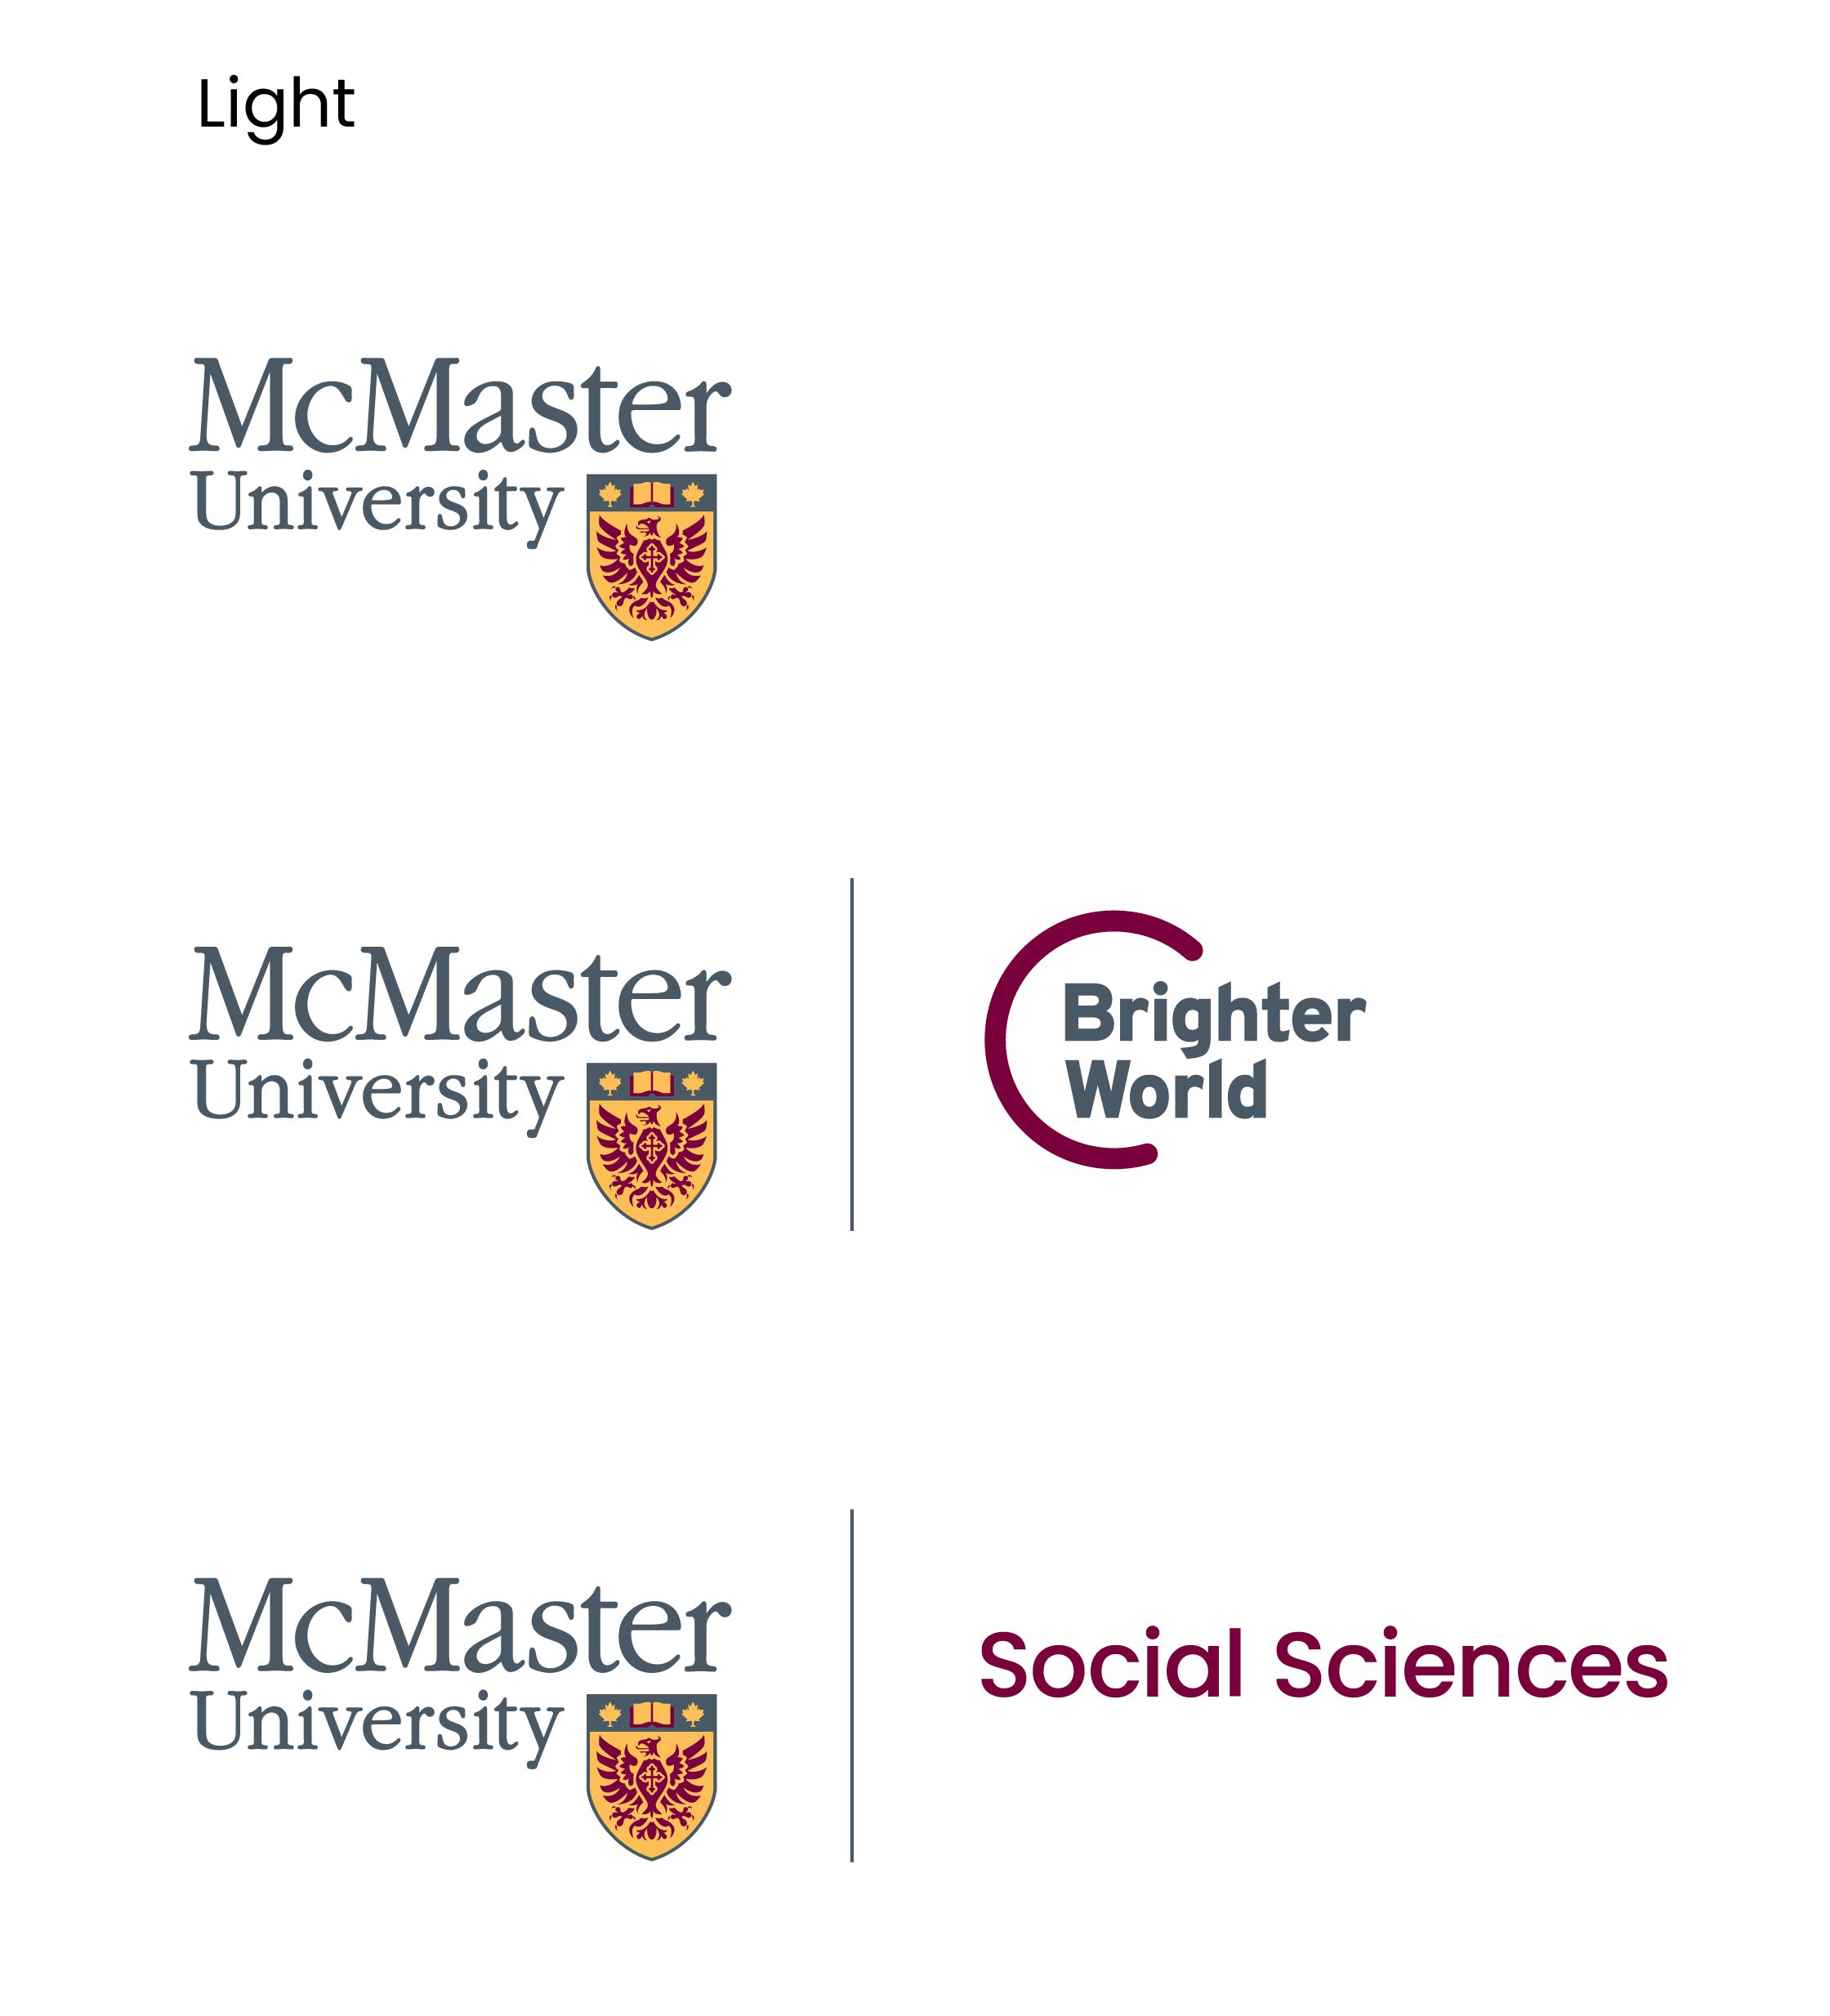 Three different use cases for the McMaster University logo are displayed in light mode. There is the standard McMaster University logo, the McMaster University logo next to the Brighter World logo, and the McMaster University logo next to a faculty logo. 